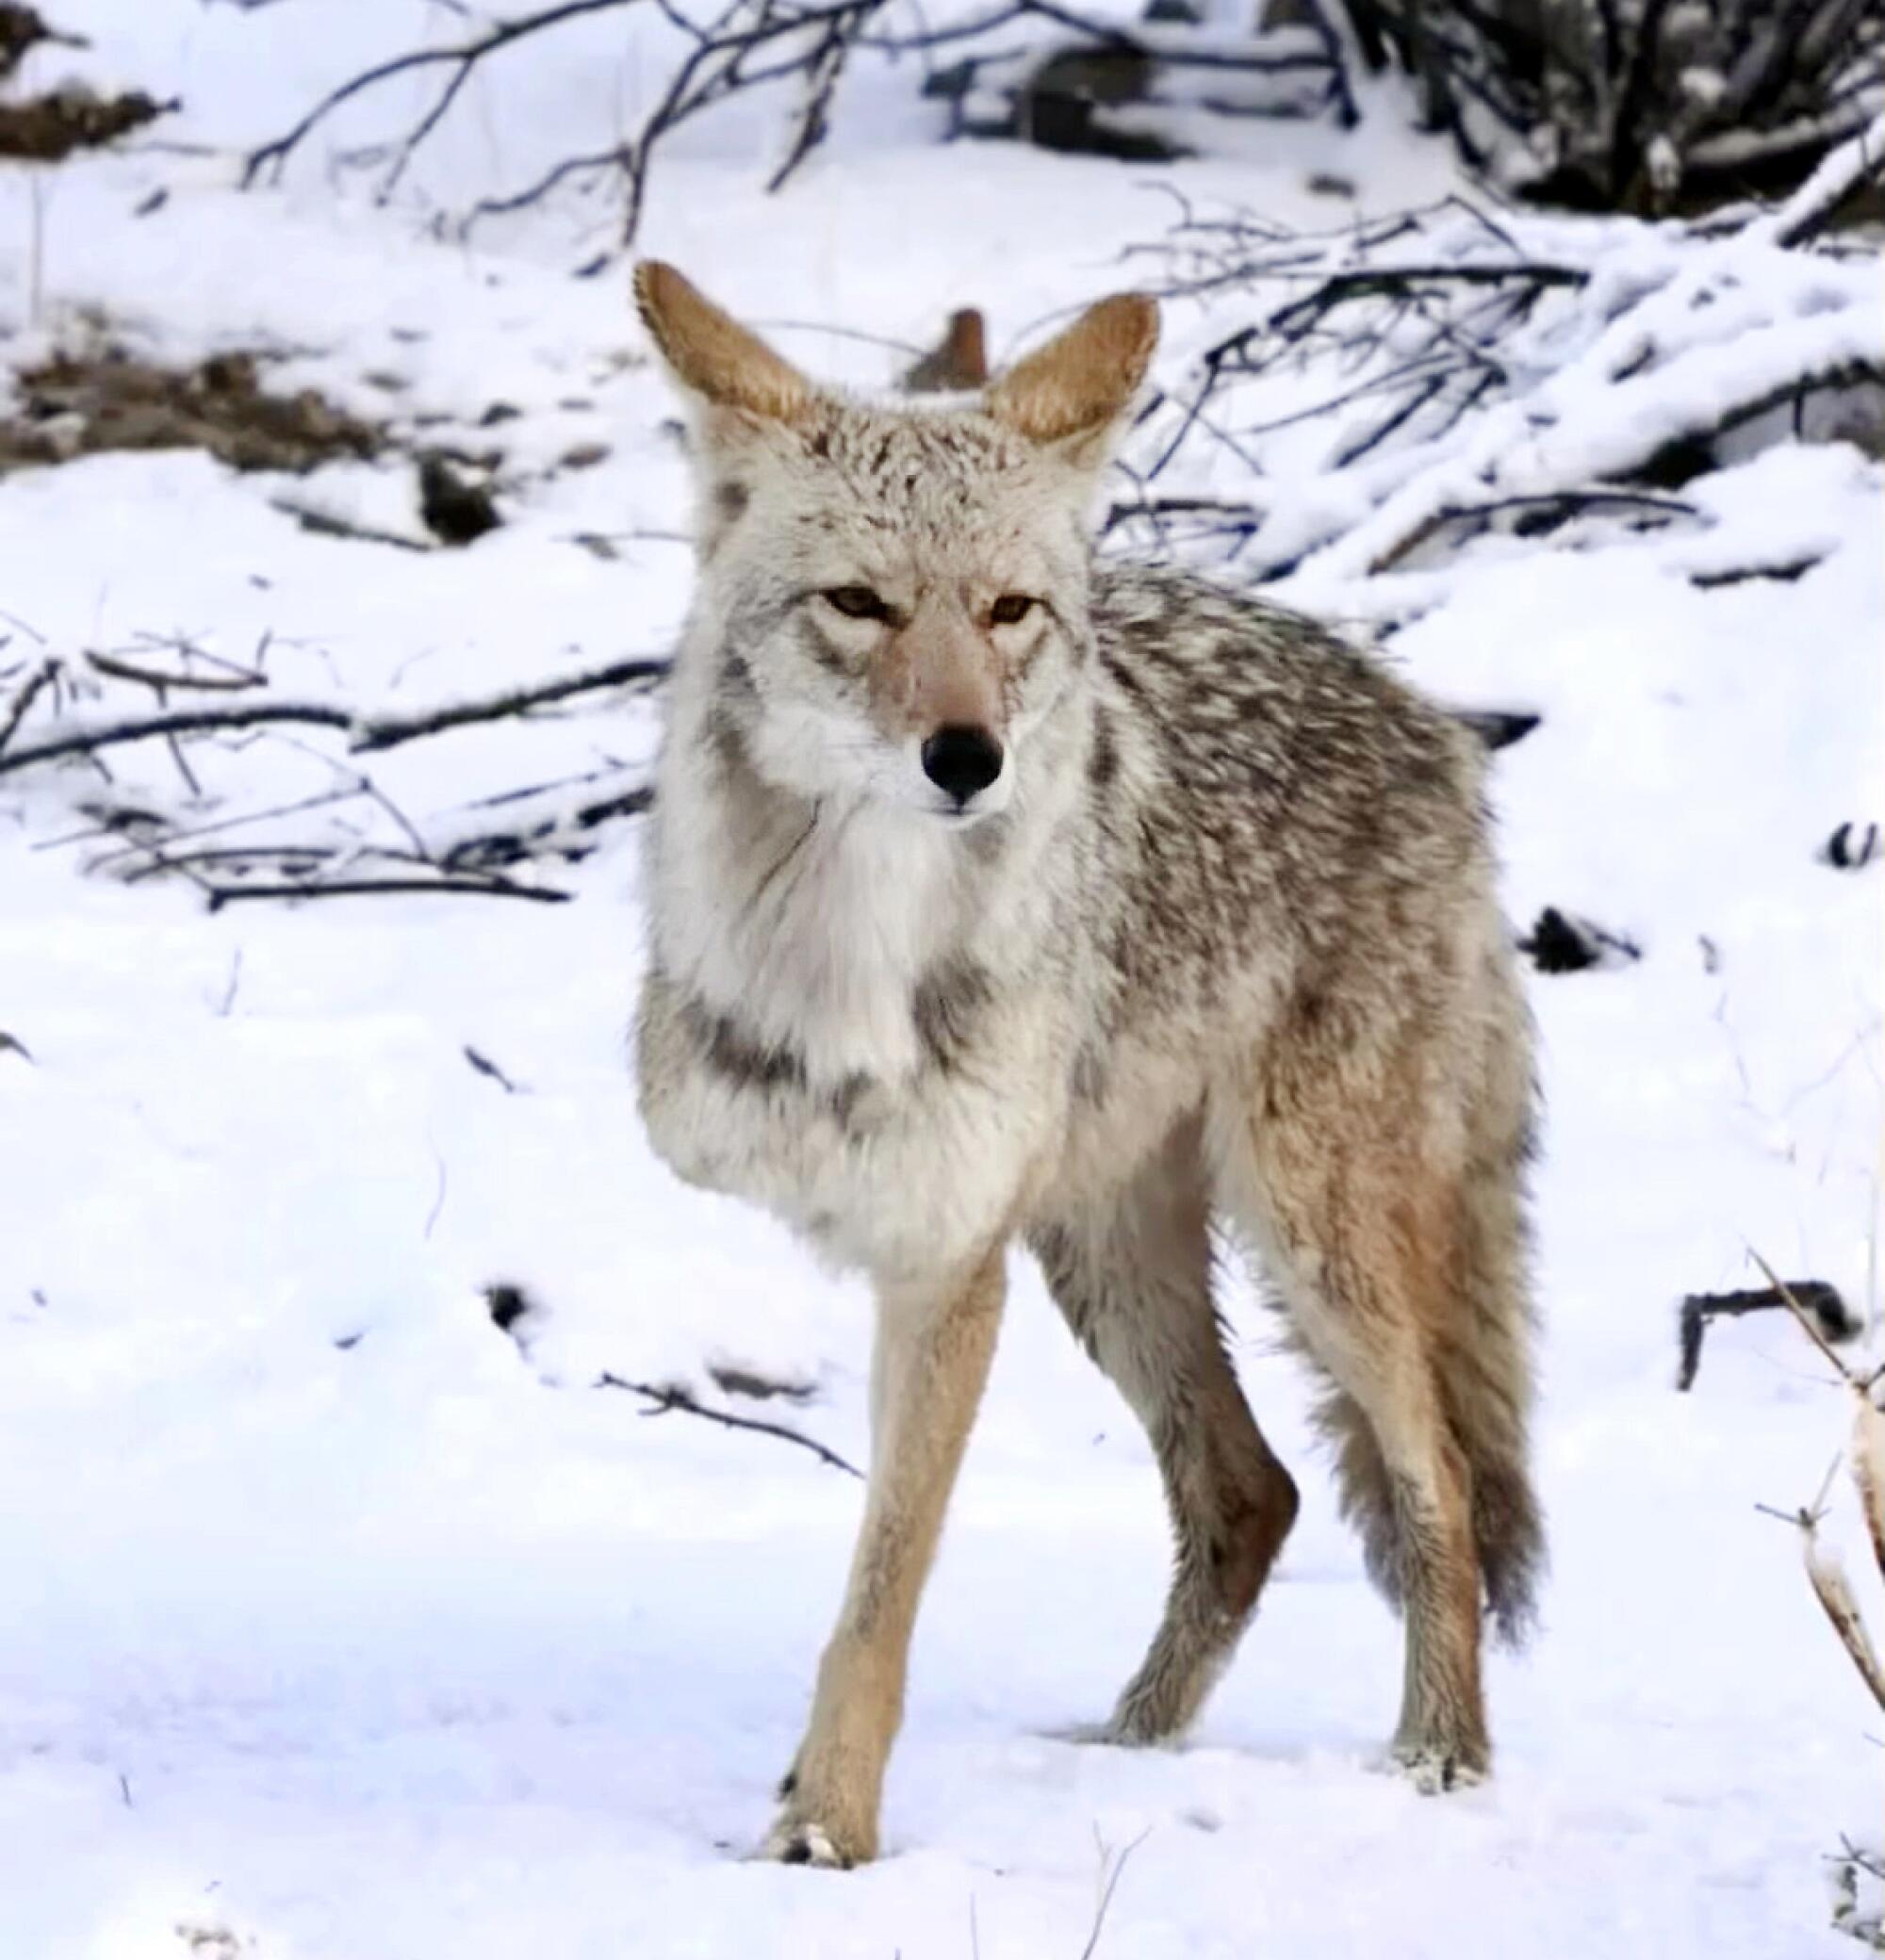 A coyote missing its right foreleg stands on snow.